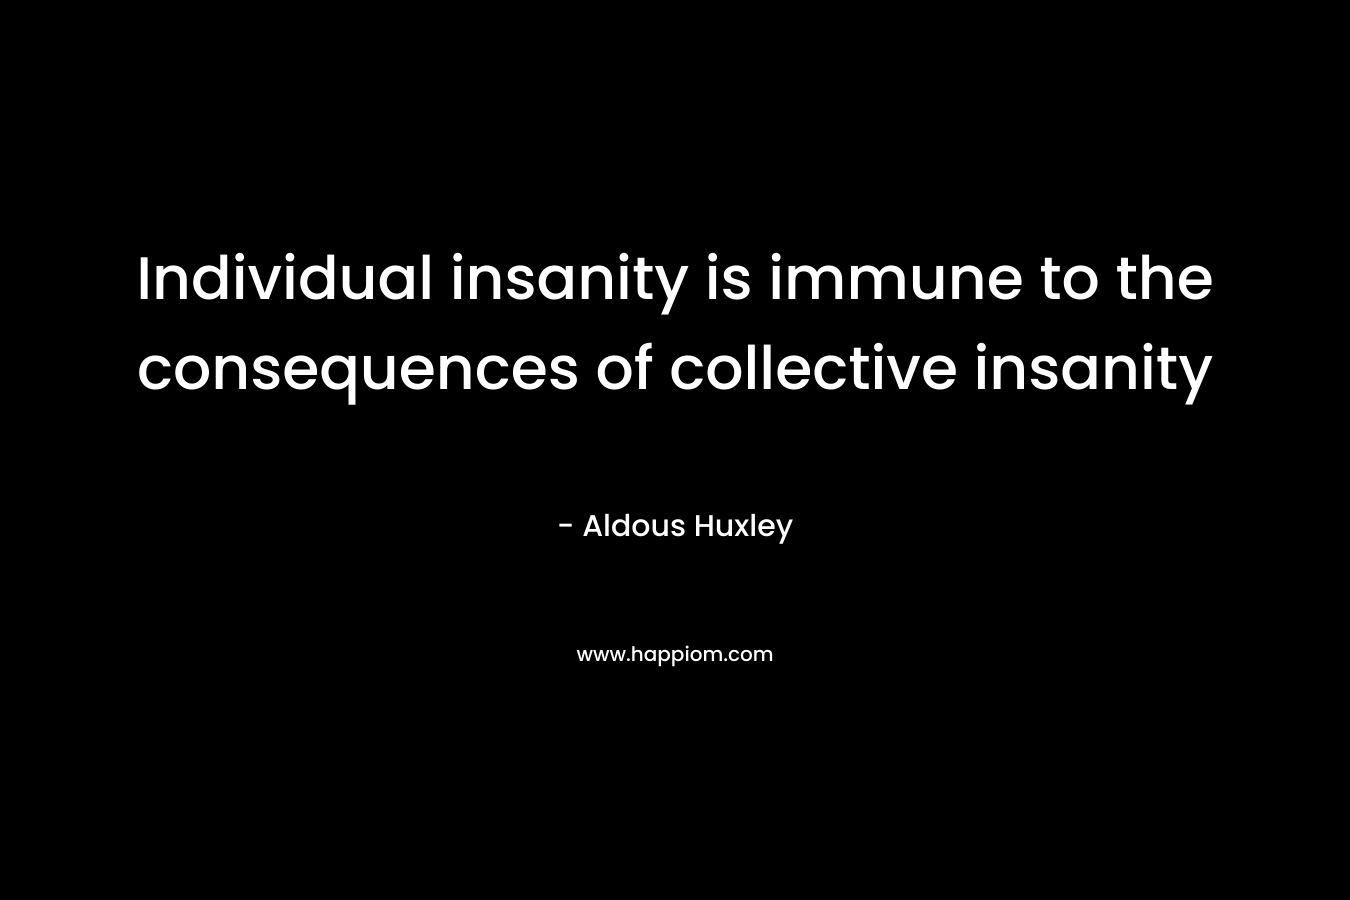 Individual insanity is immune to the consequences of collective insanity